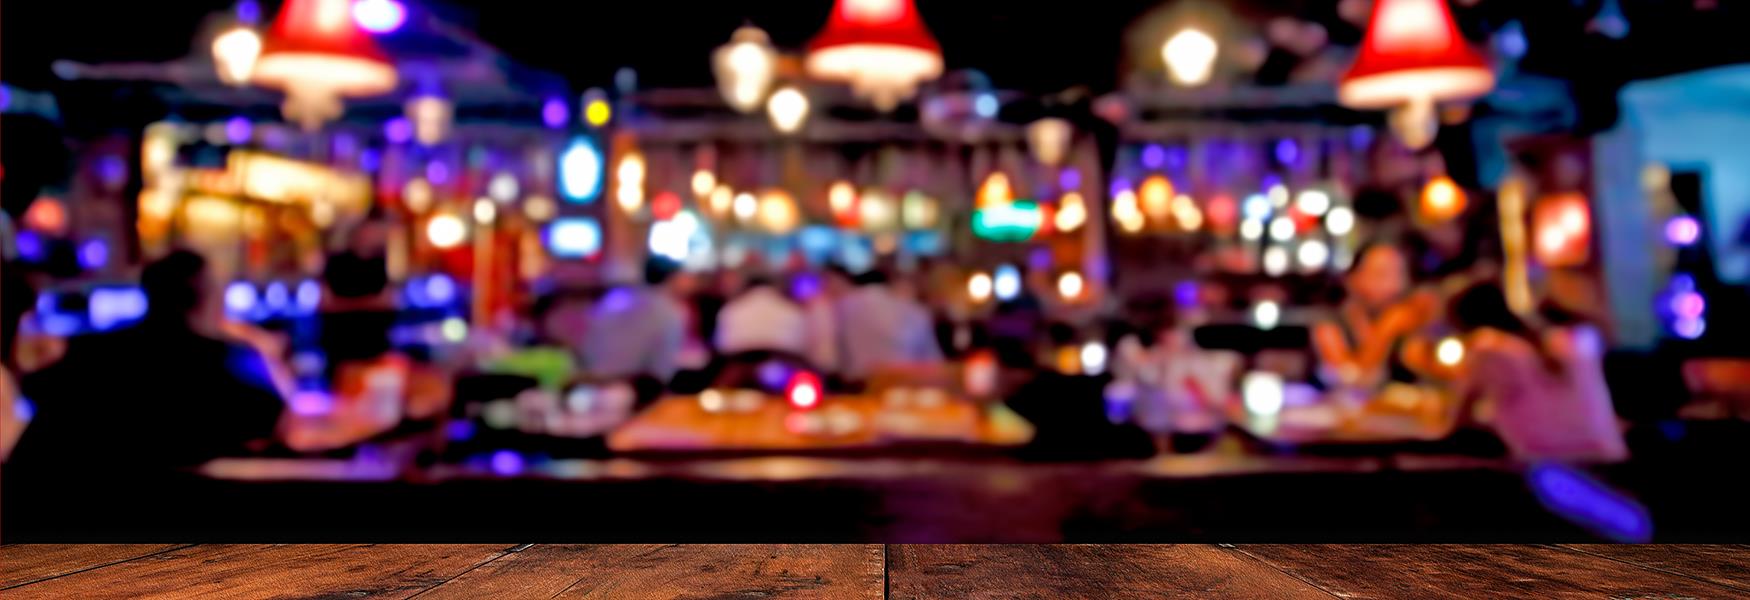 wooden-table-front-abstract-blurred-background-resturant-lights